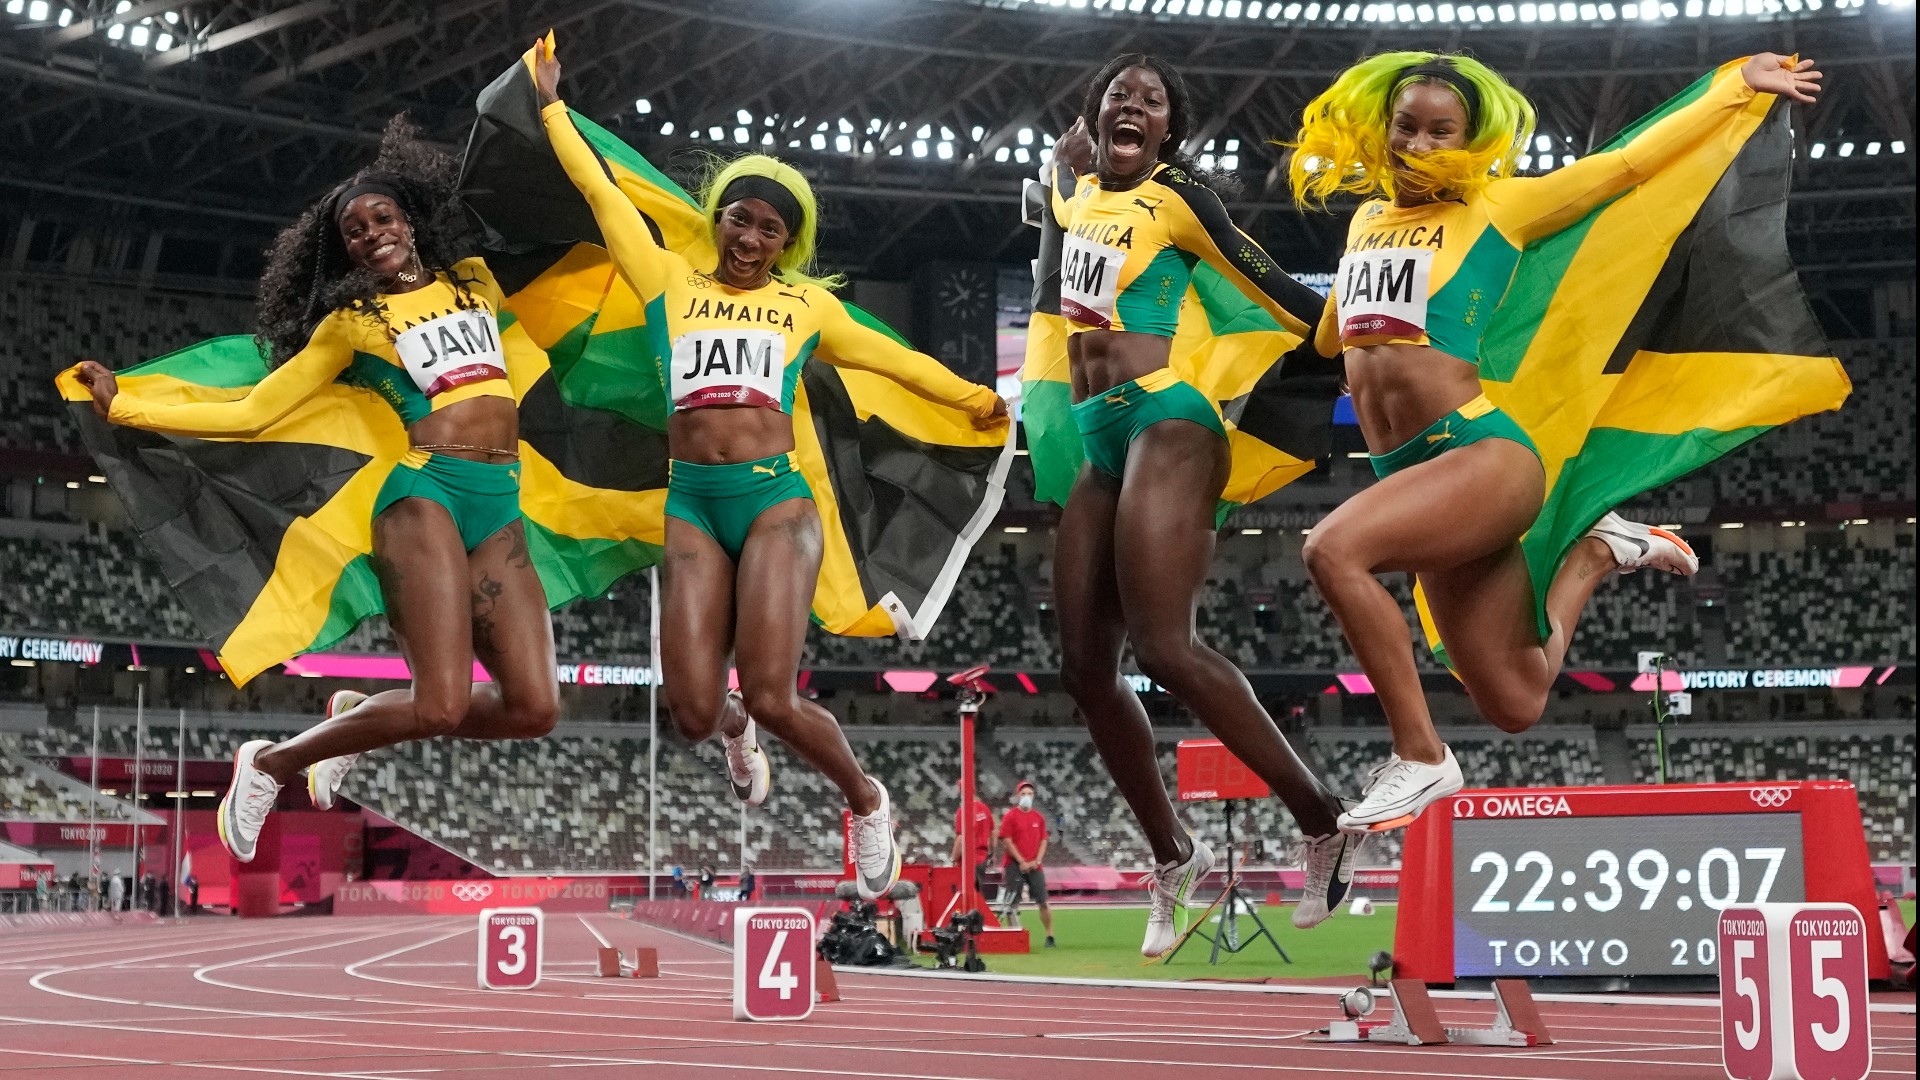 Jamaicans Win Womens 4x100 Relay Us Gets Silver